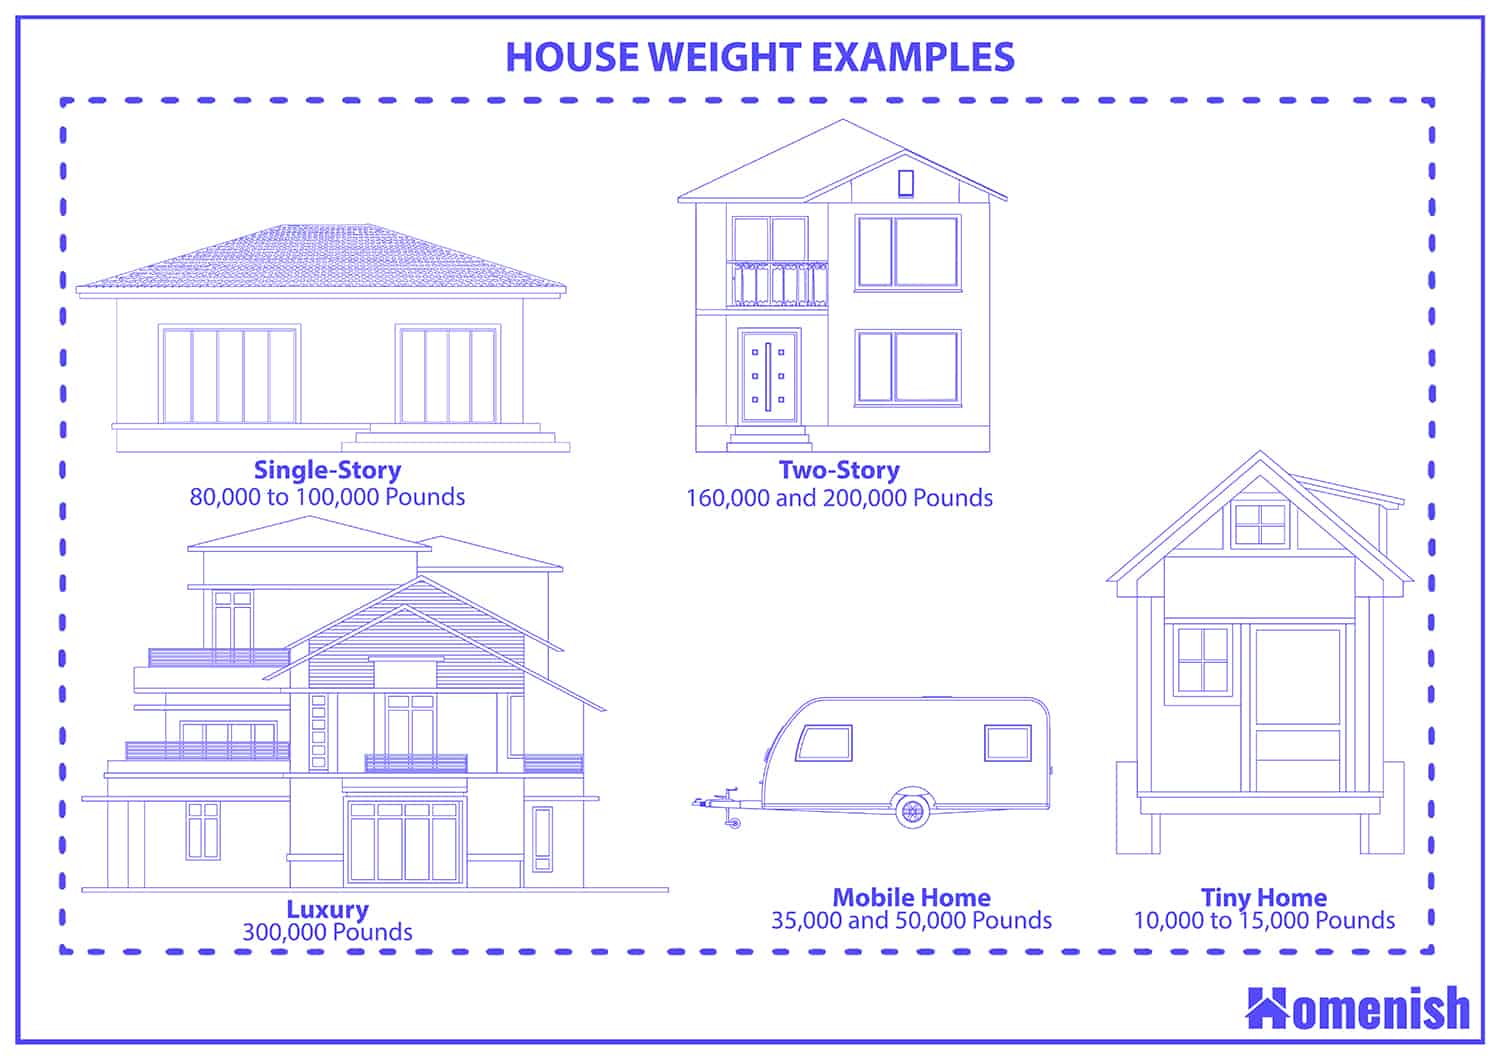 House weights examples